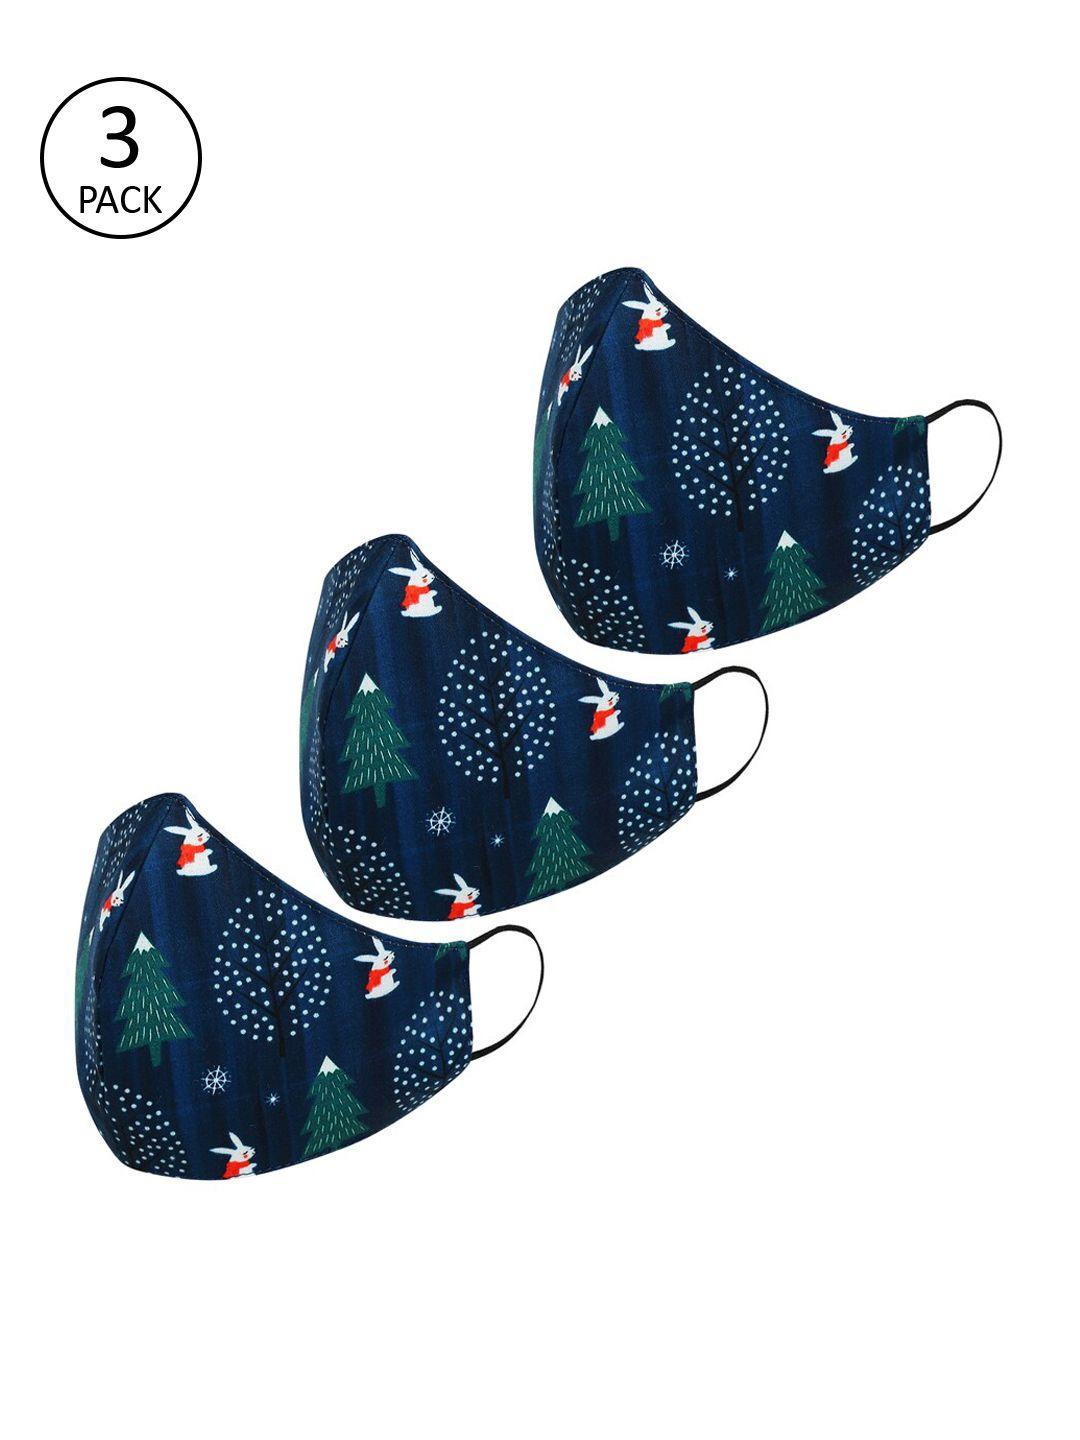 tossido kids pack of 3 navy blue & white printed 3-ply outdoor masks